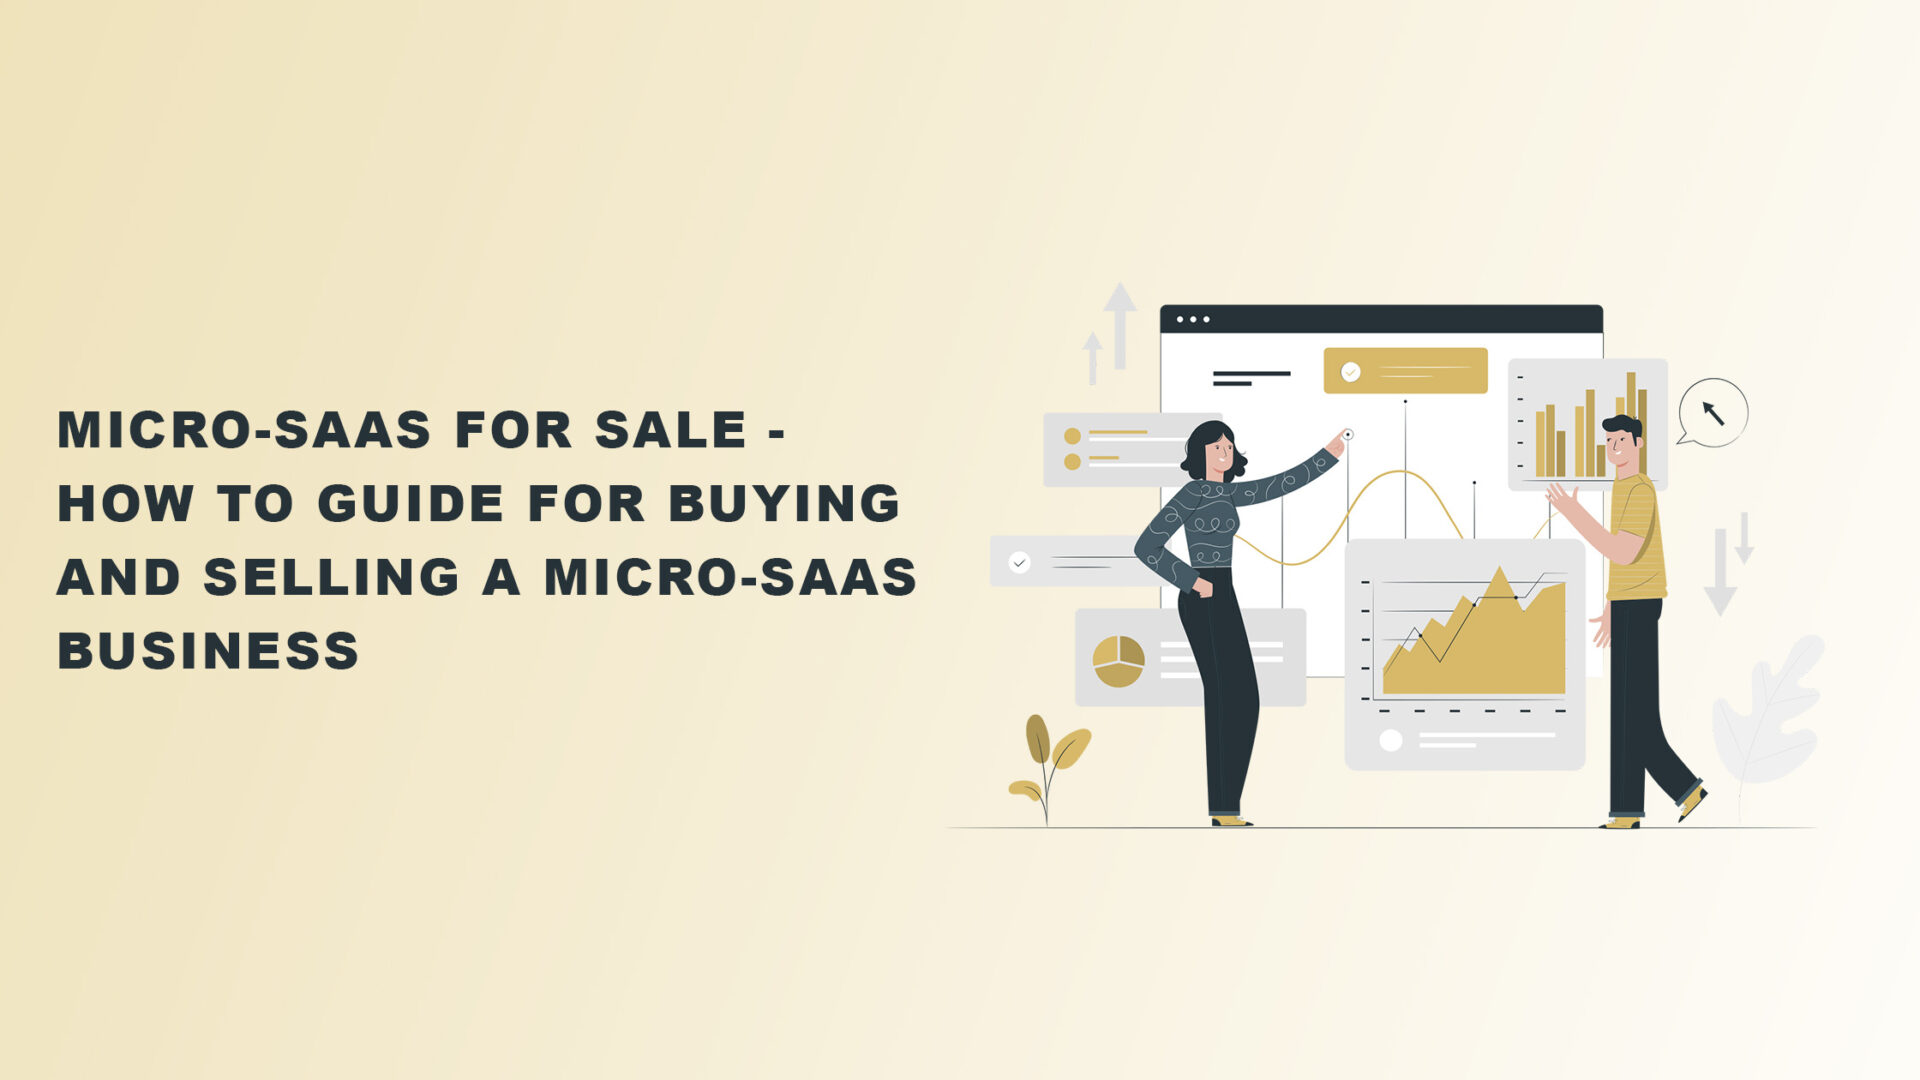 Micro-SaaS for Sale - How to Guide for Buying and Selling a Micro-SaaS Business